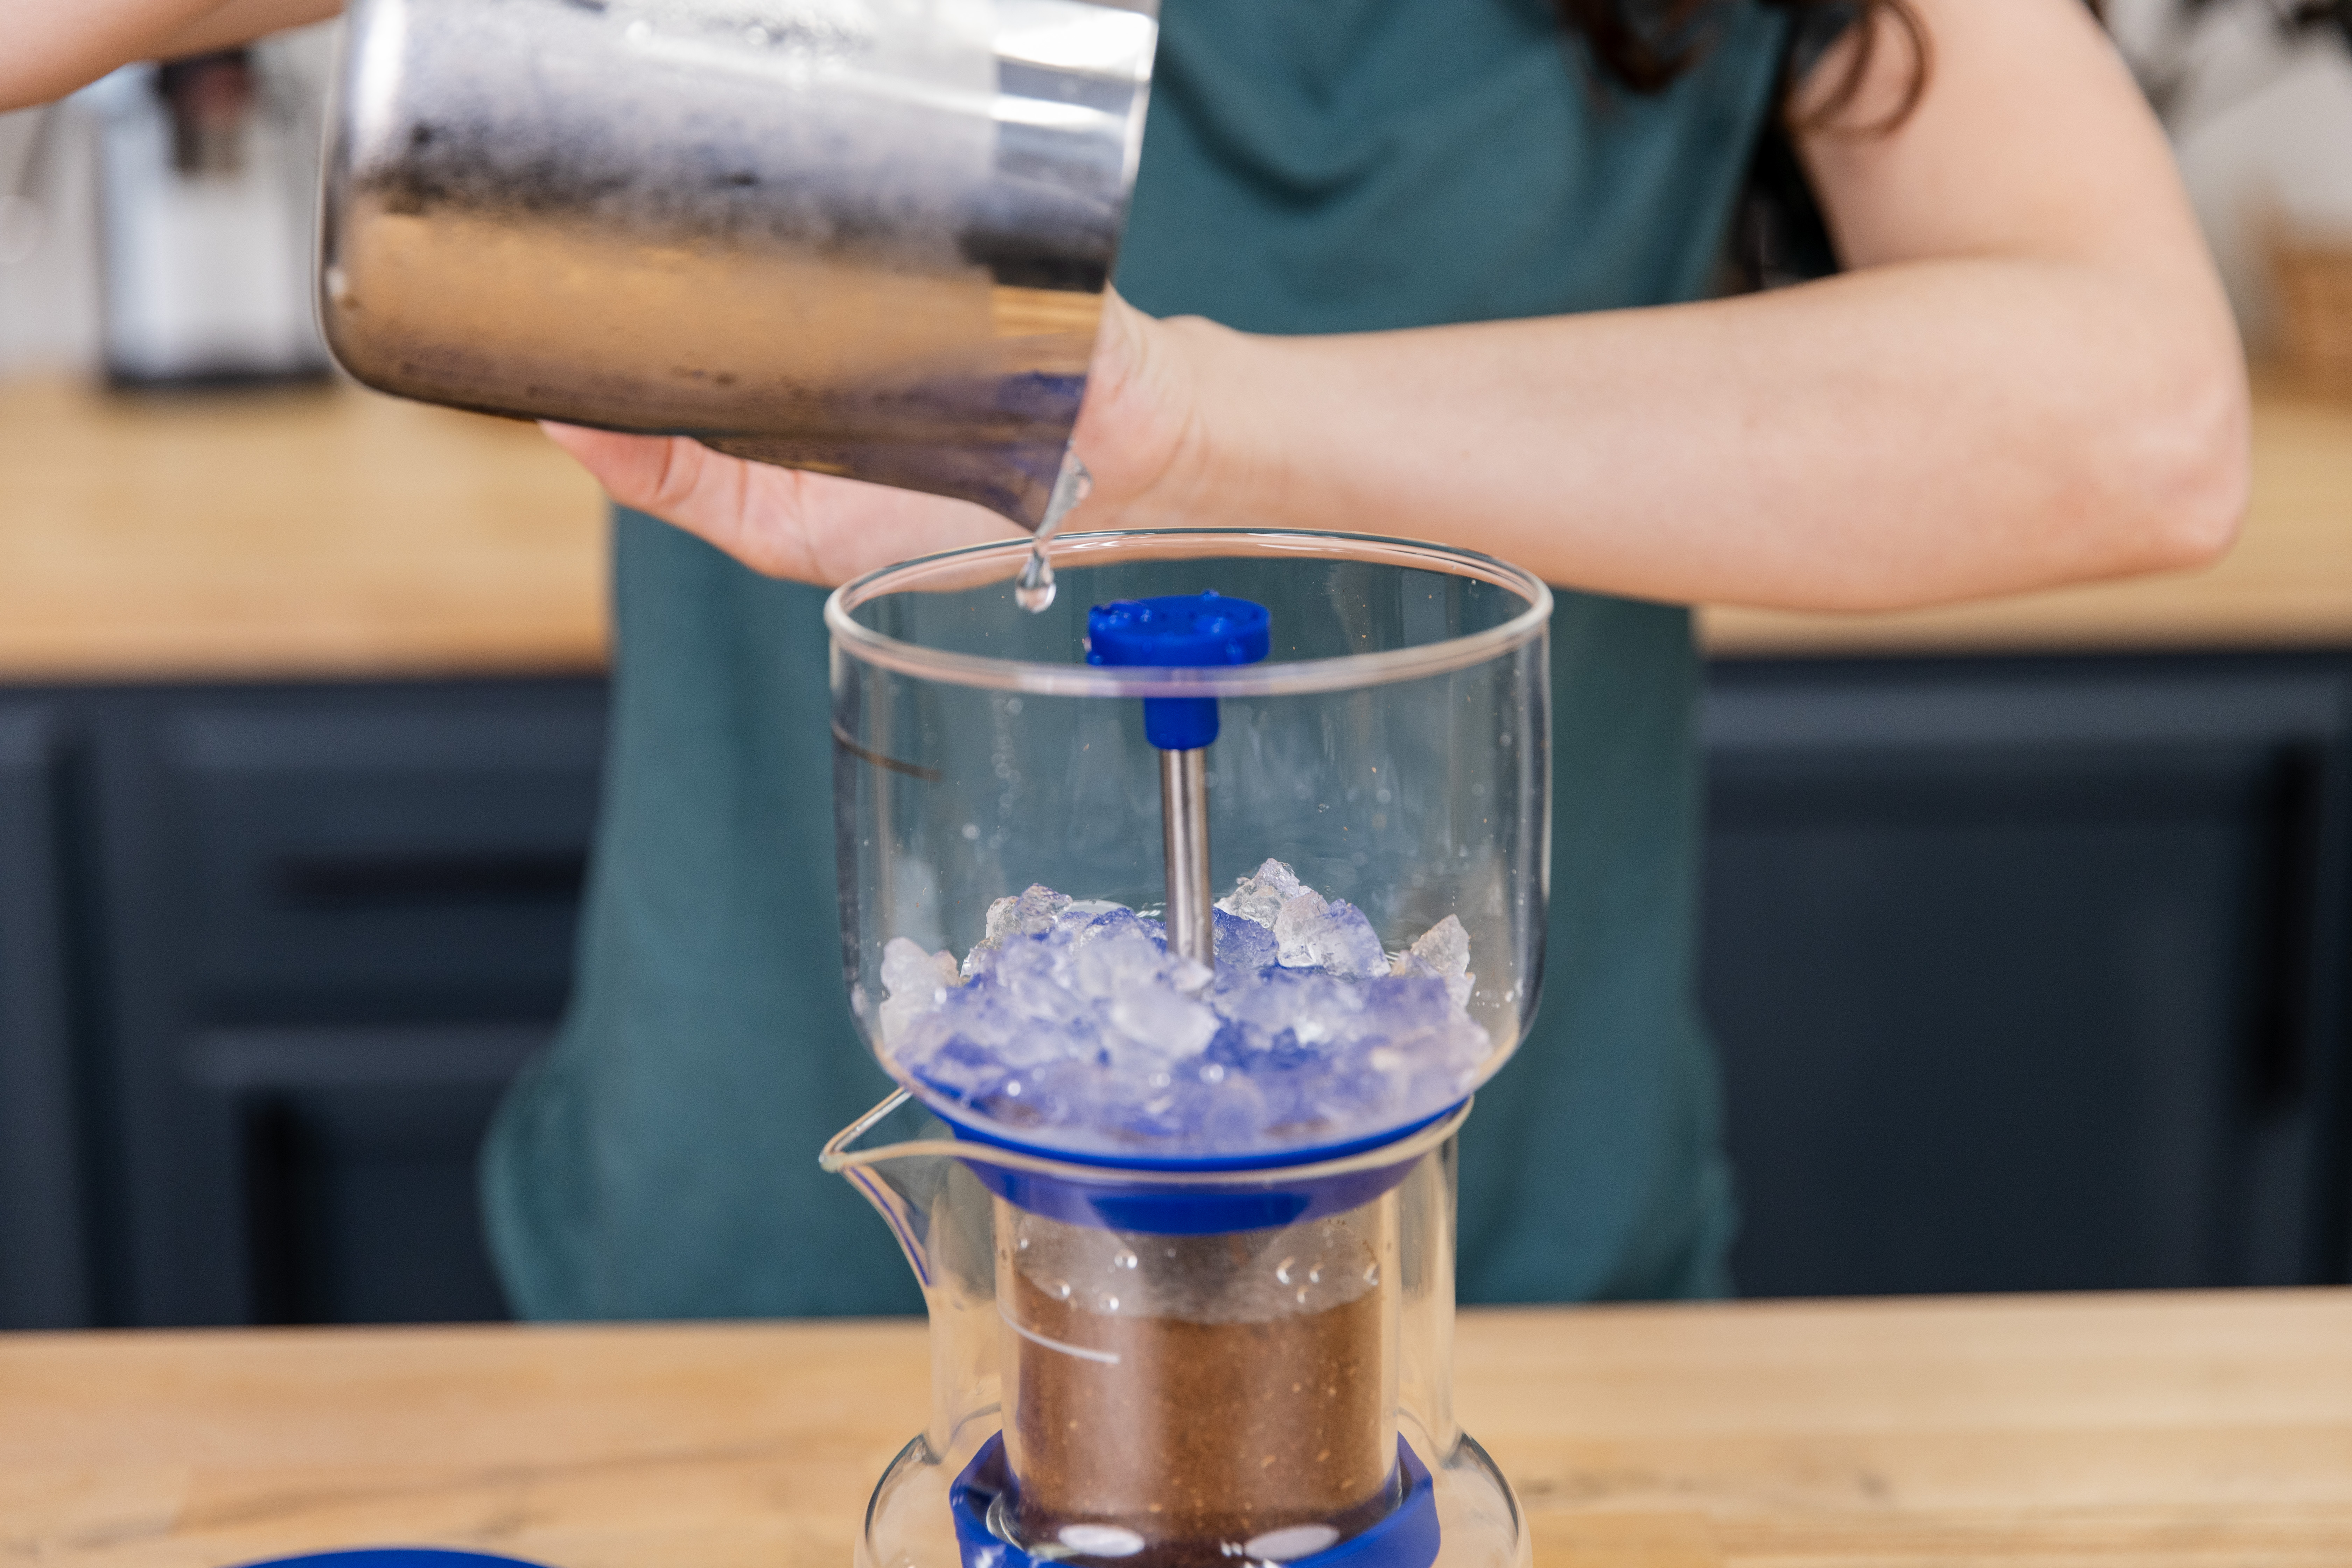 How to Use the Bruer Cold Brew System to Make Iced Coffee 